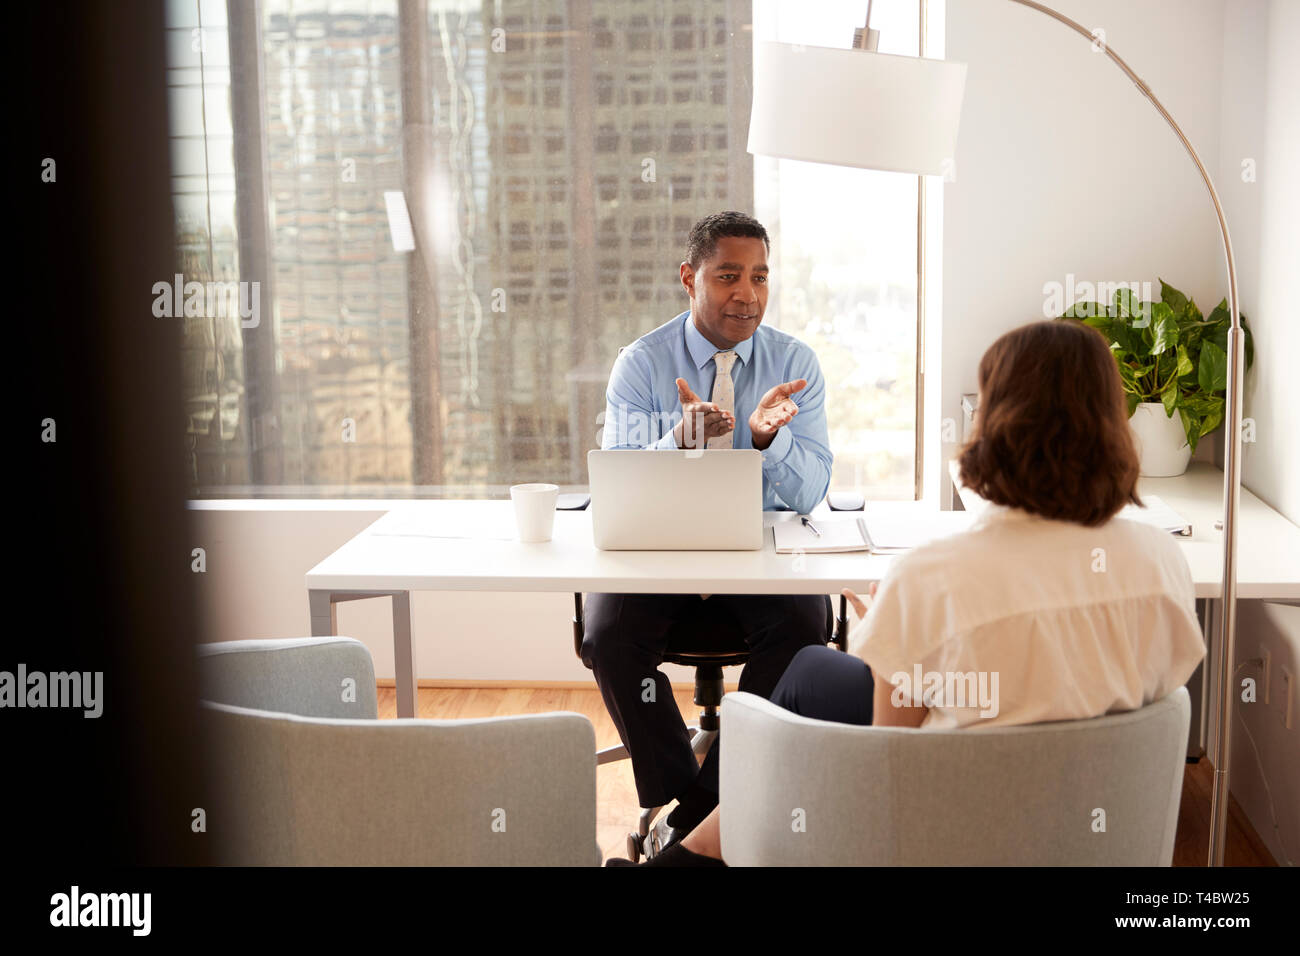 Male Financial Advisor In Modern Office Sitting At Desk Meeting Female Client Stock Photo